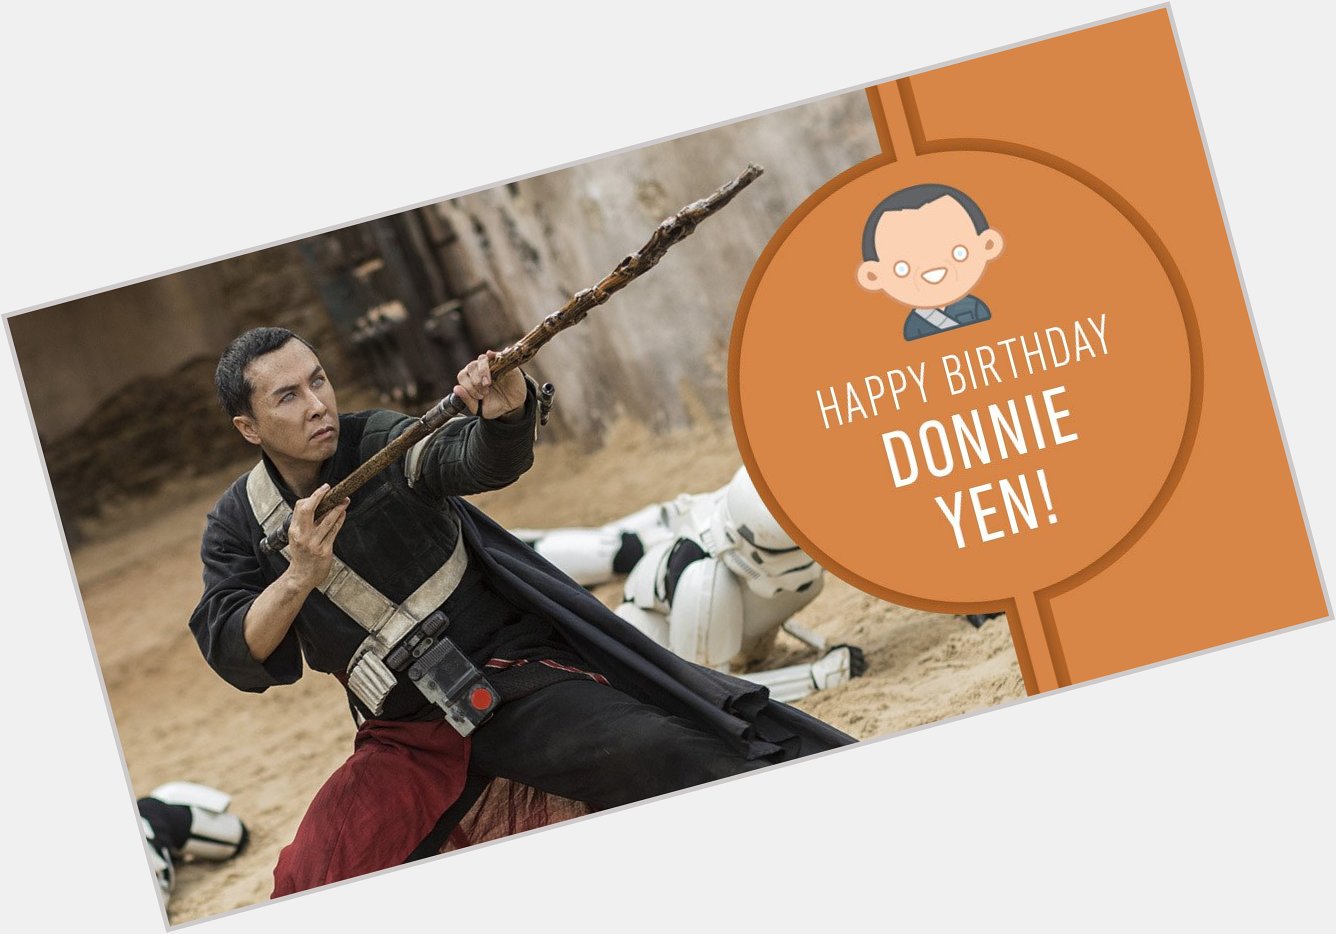  >> Happy Birthday, Donnie Yen! May the Force of others be with you.  